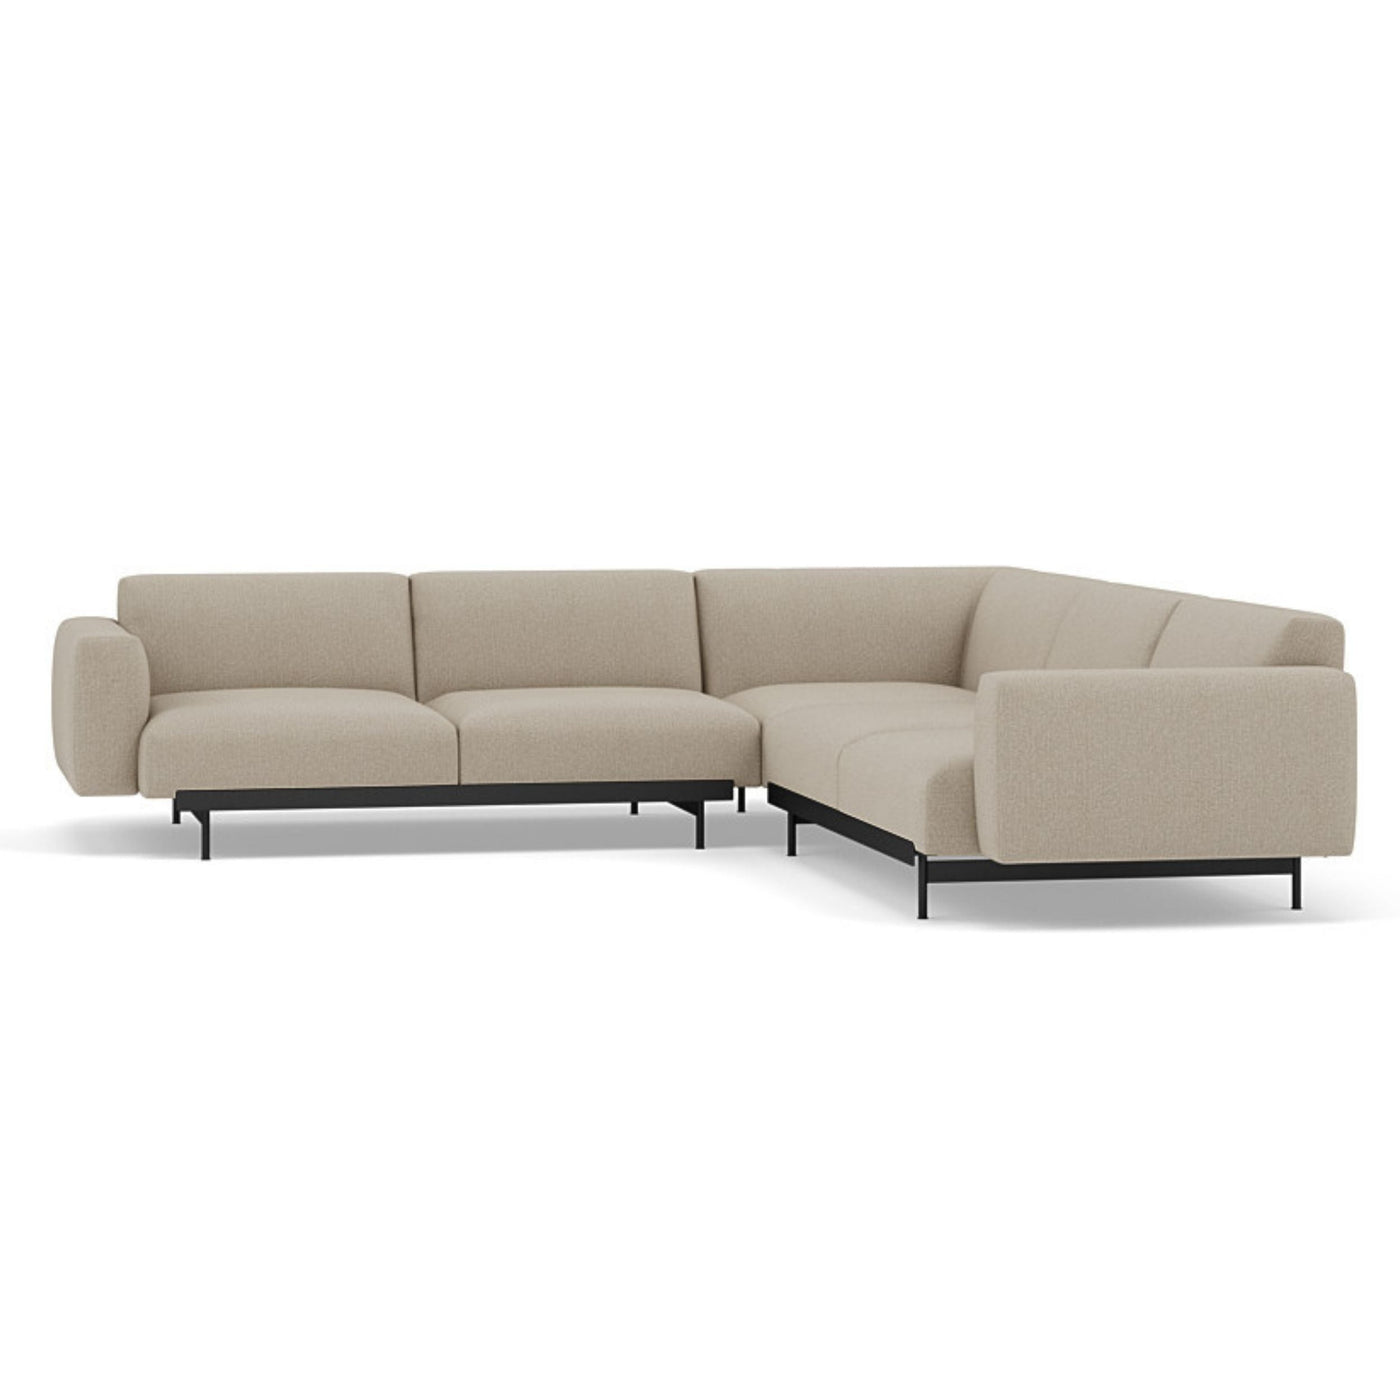 Muuto In Situ corner sofa, configuration 1. Made to order from someday designs. #colour_clay-10